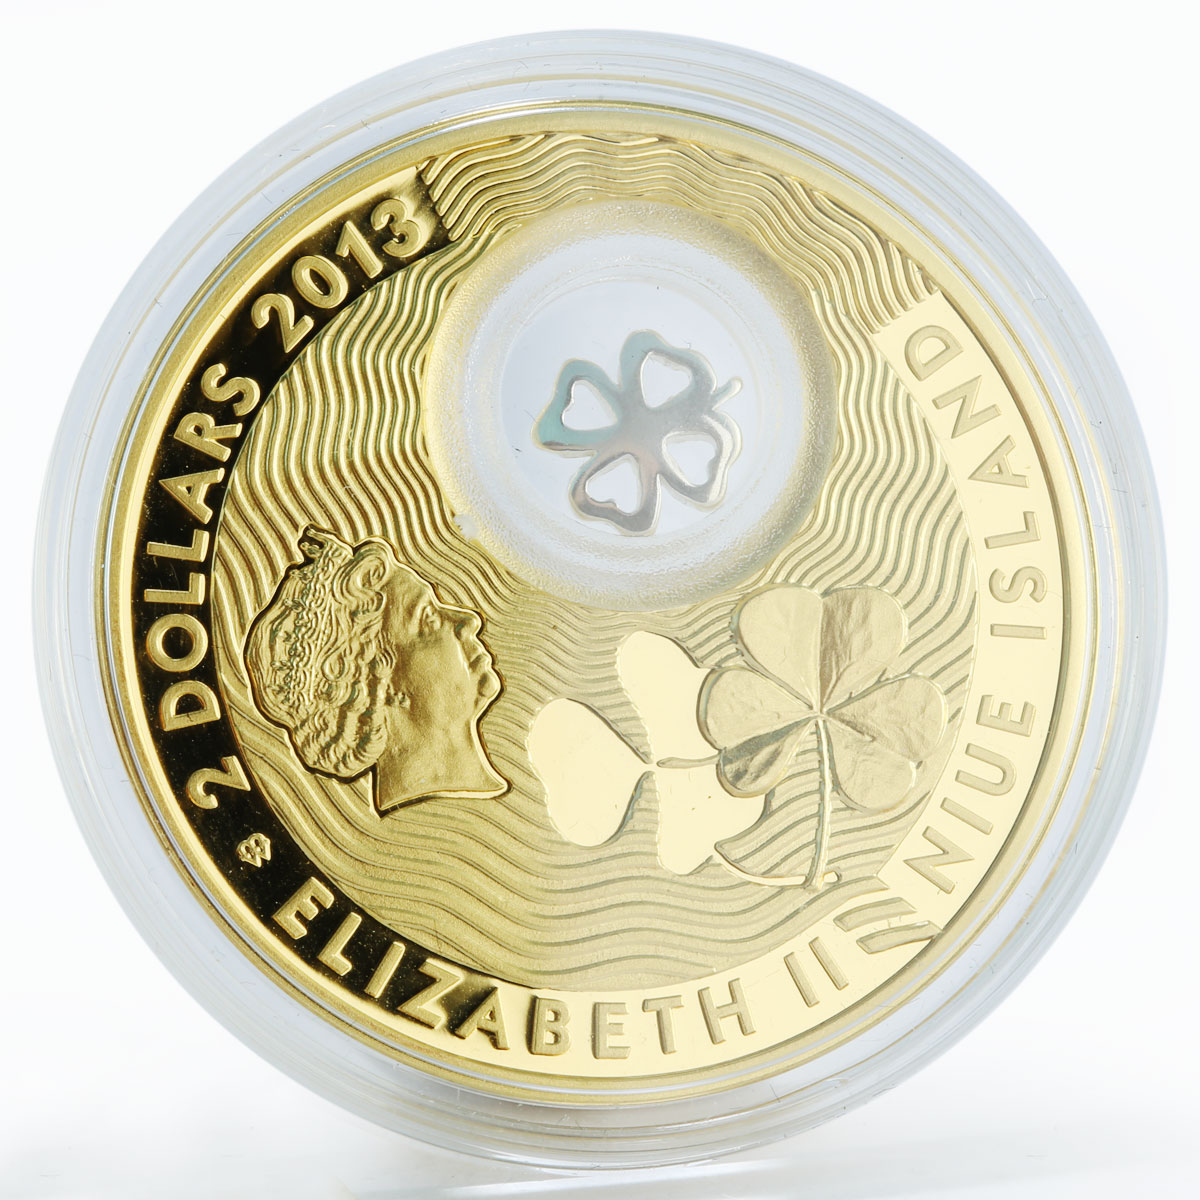 Niue 2 dollars Good Luck Clover gilded proof silver coin 2013